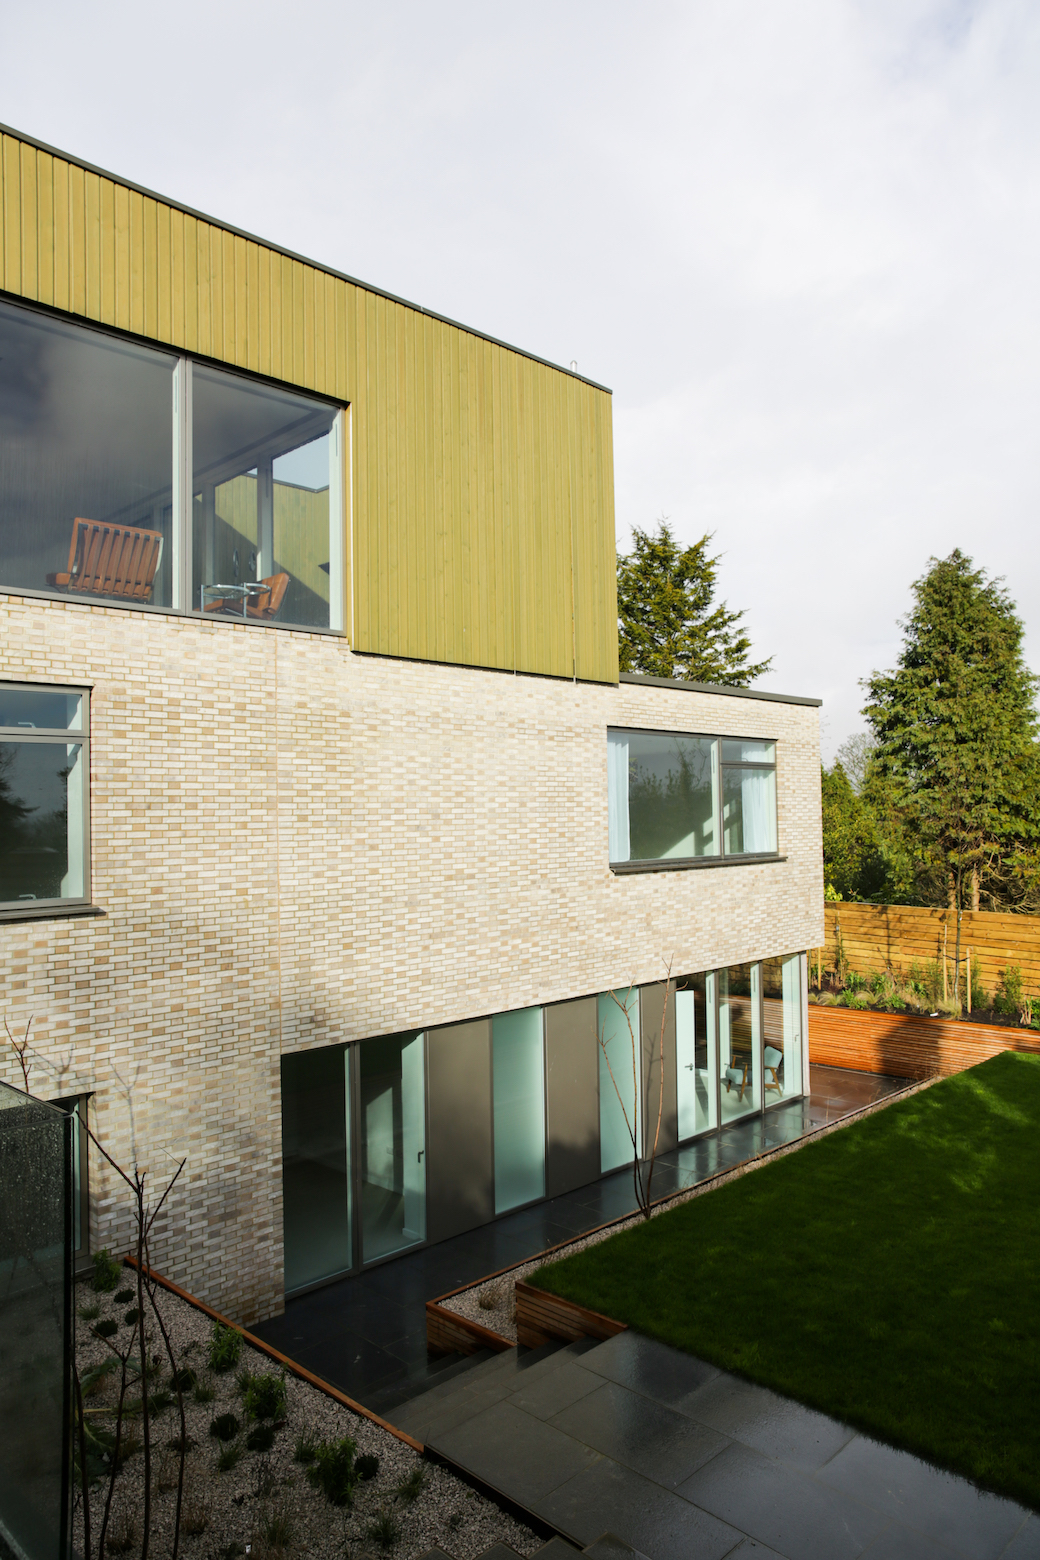 Withdean Road in Brighton, designed by John Pardey Architects, marketed by Aucoot; photography by Aucoot.